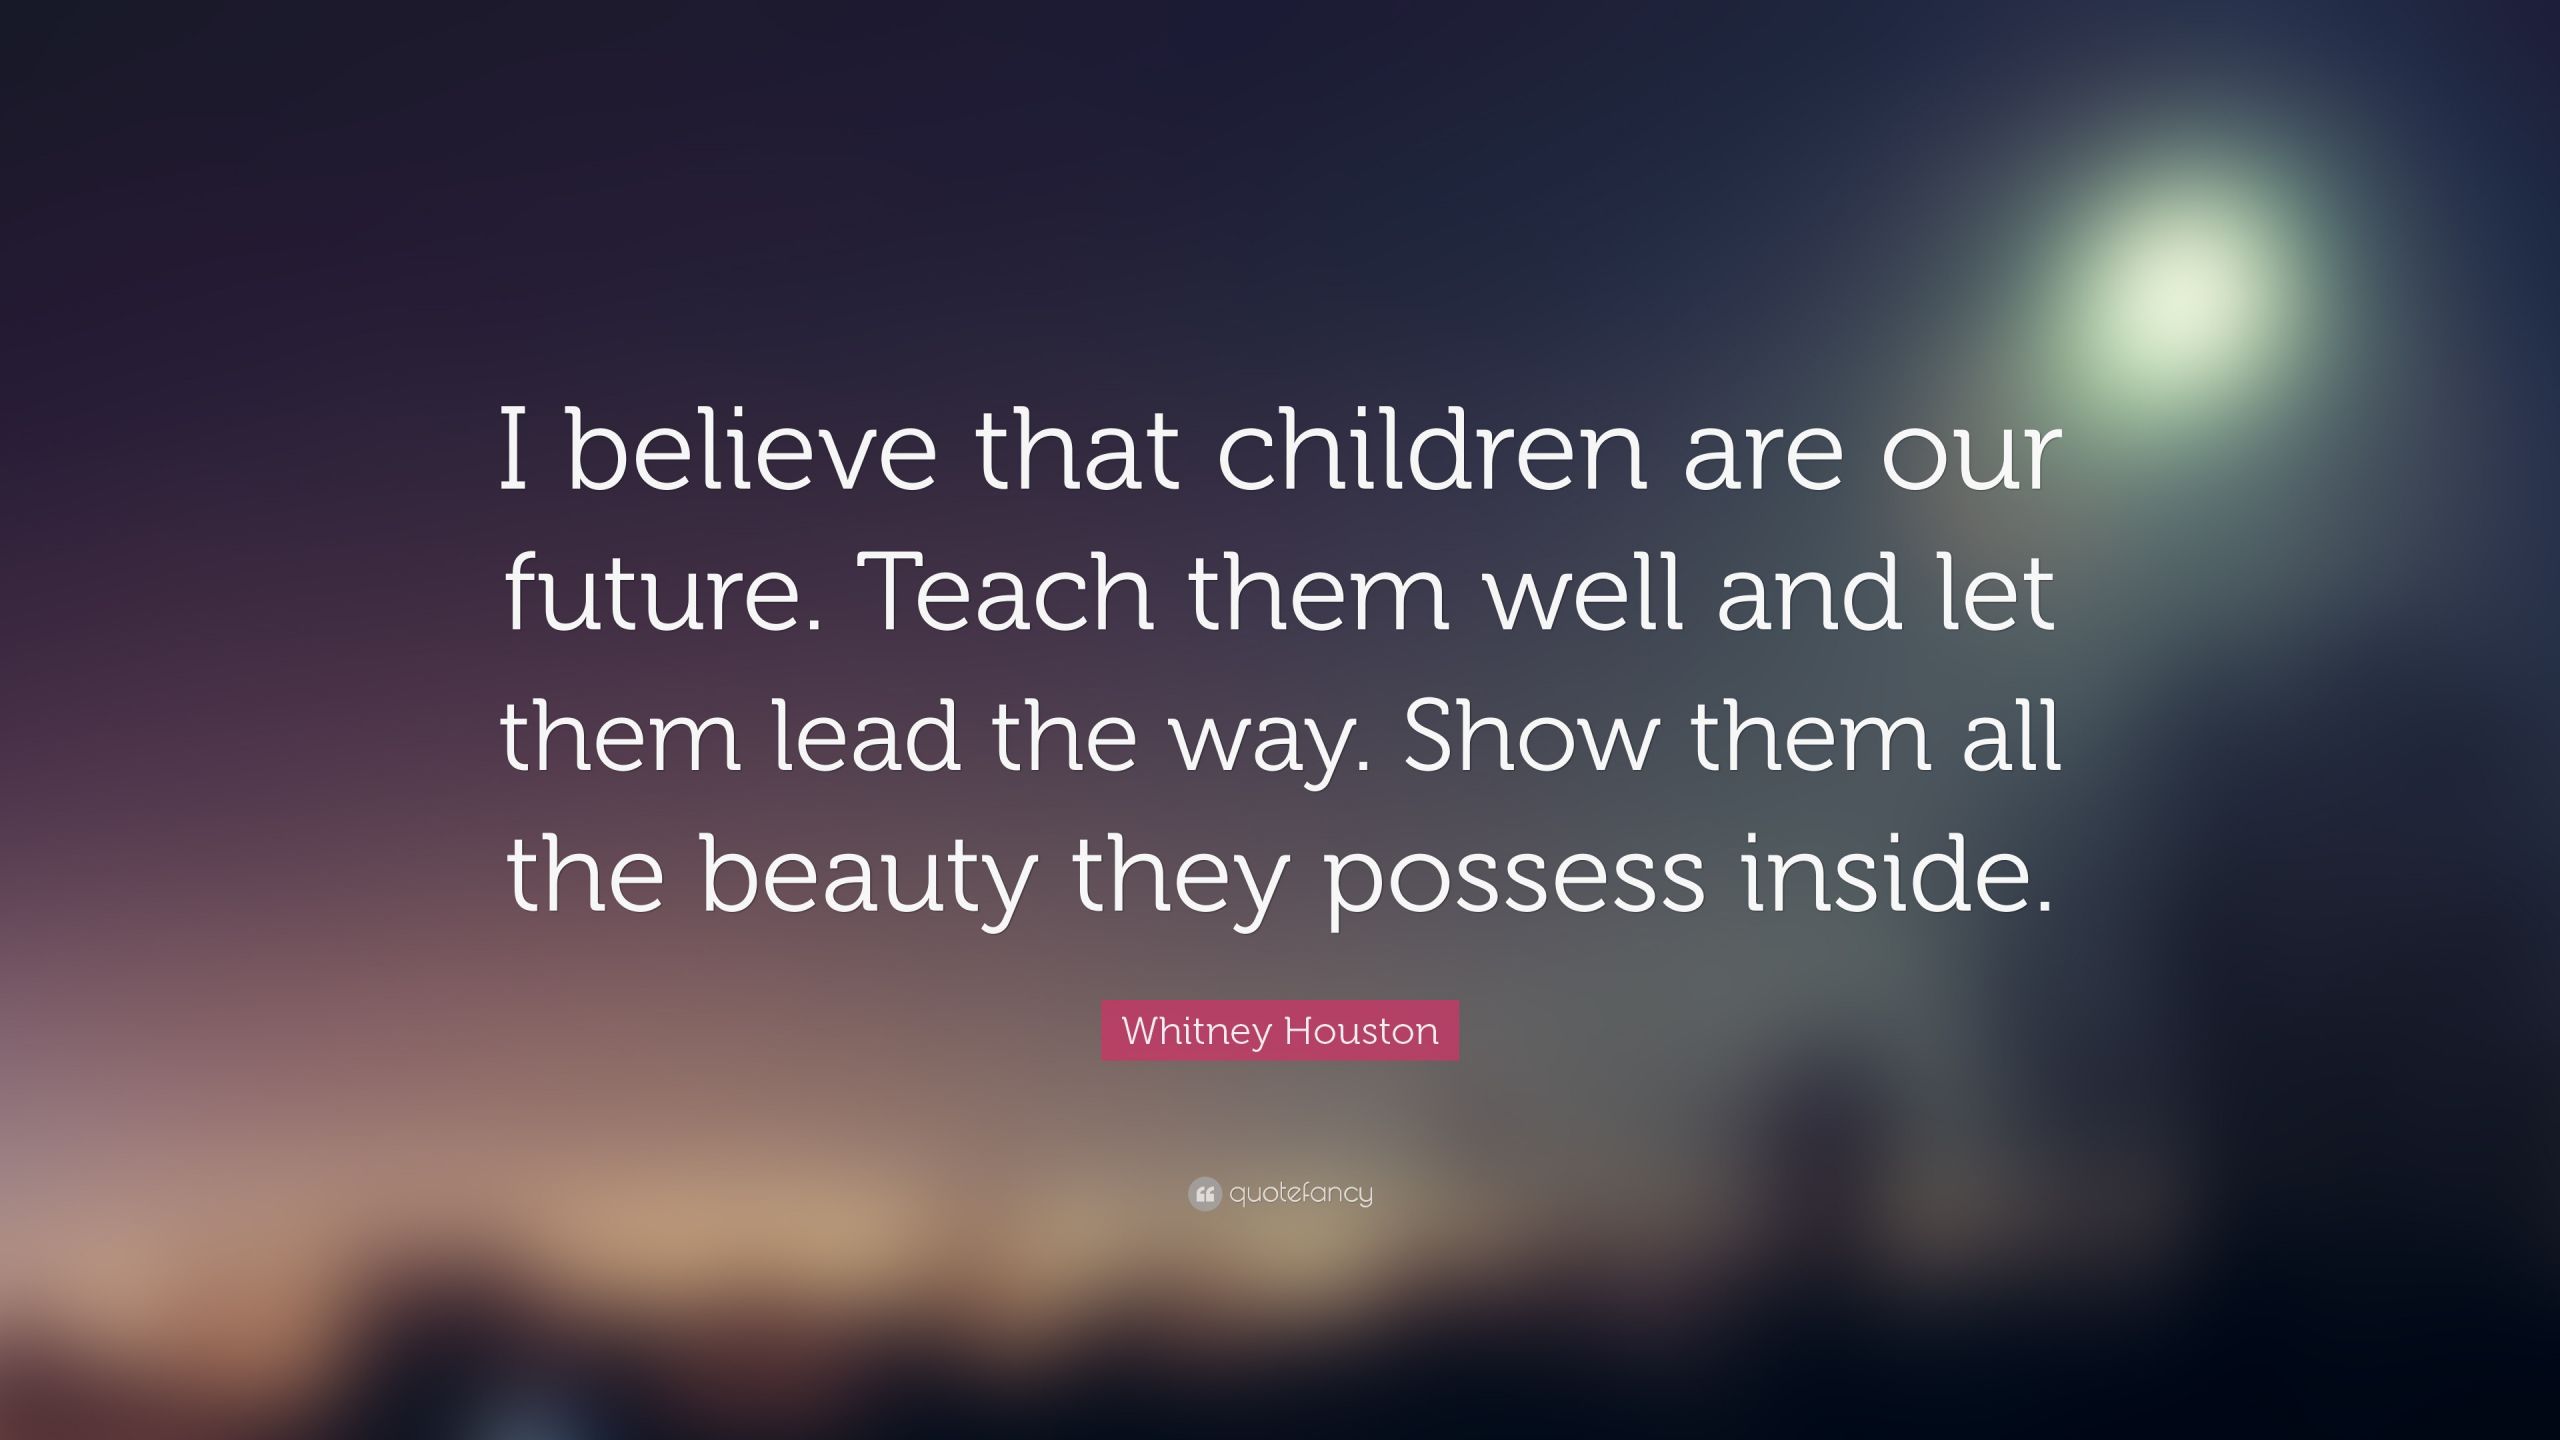 Kids Are The Future Quote
 Whitney Houston Quote “I believe that children are our